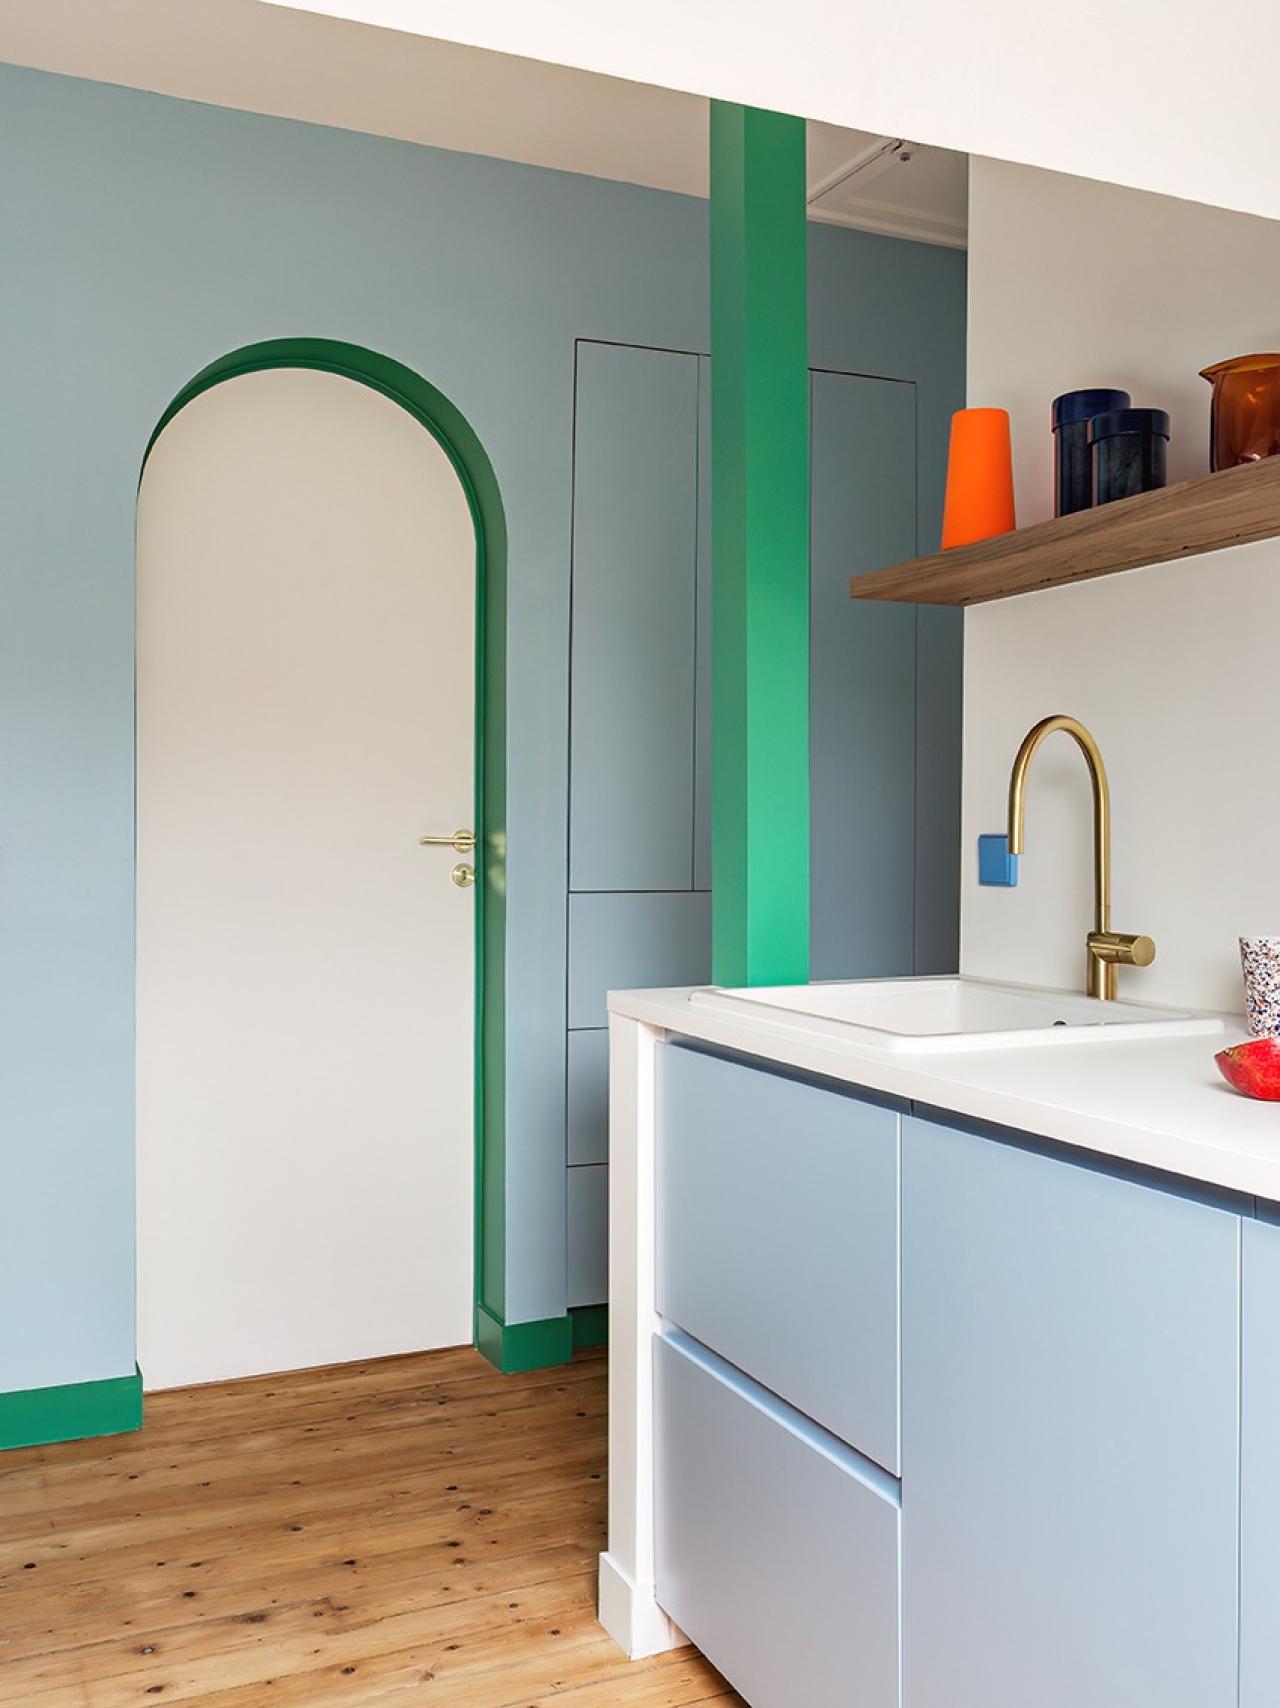 Kitchen in Blue 04 - Ciel Voilé  and arched door